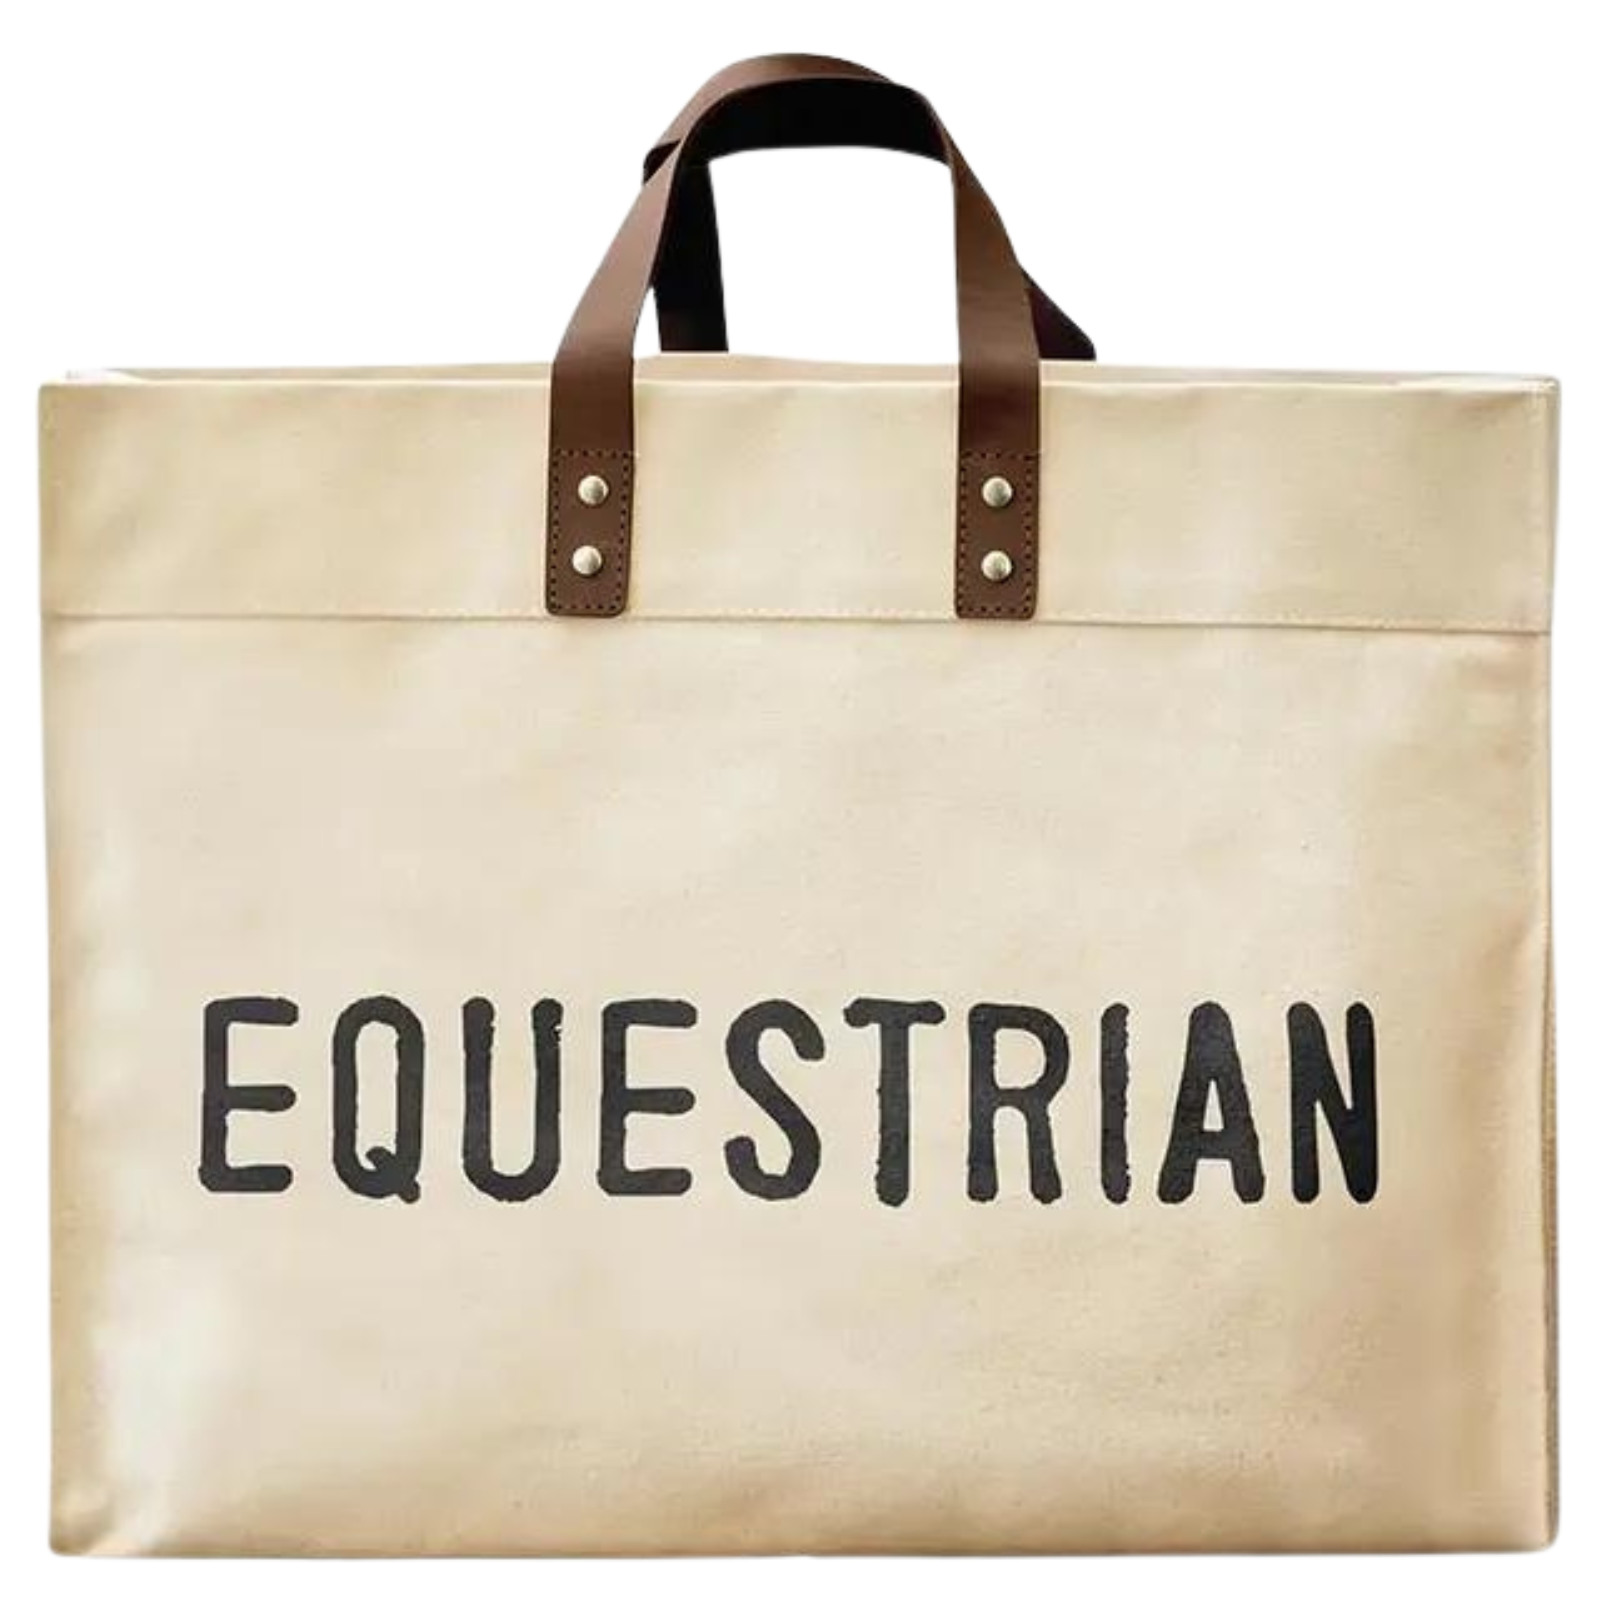 Face to Face Canvas Tote in Equestrian - One Size